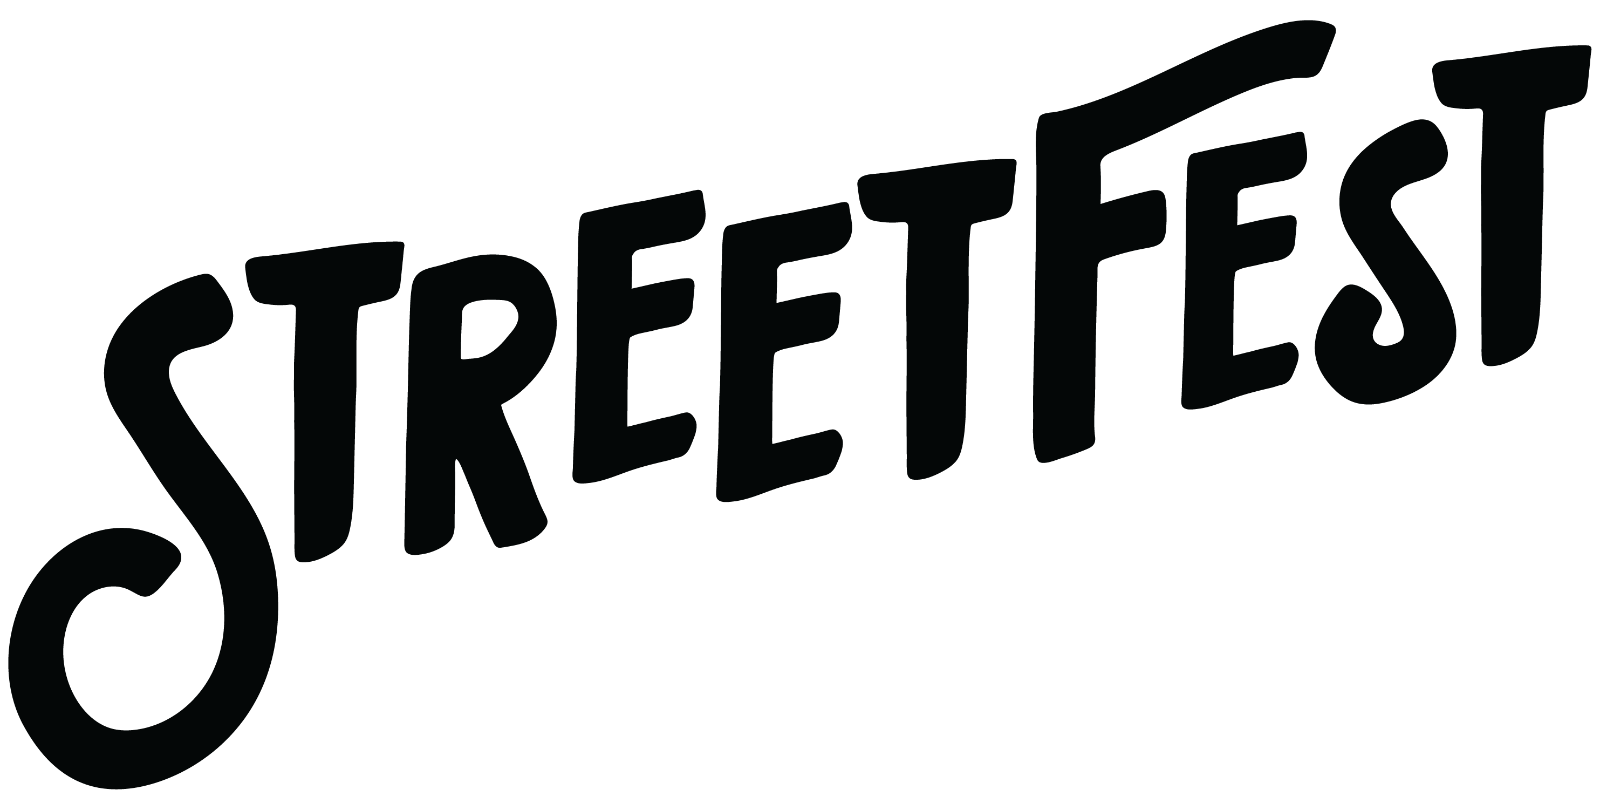 StreetFest_Horizontal_Text%20Only_Black_Large.png